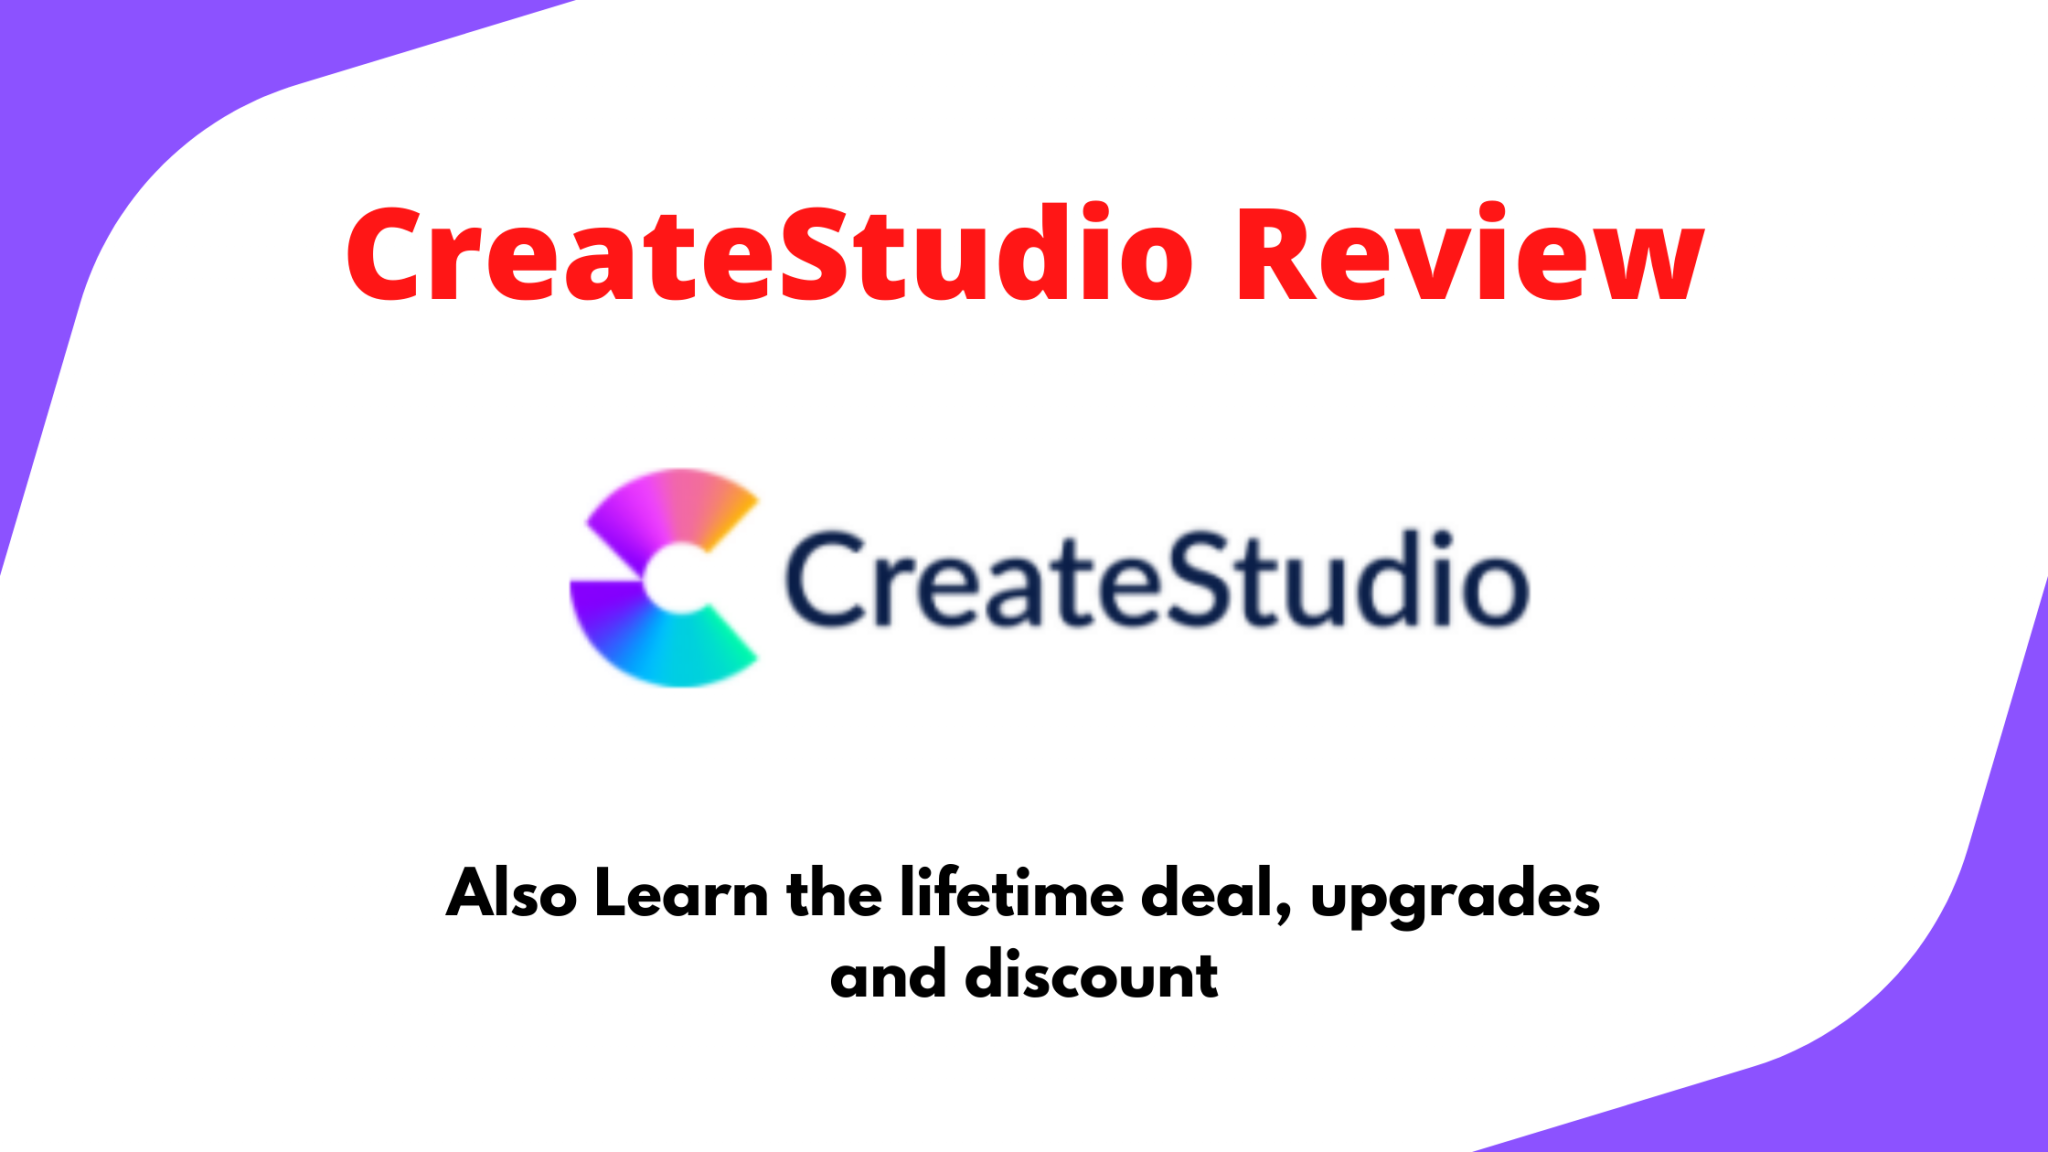 CreateStudio Review From a Real User